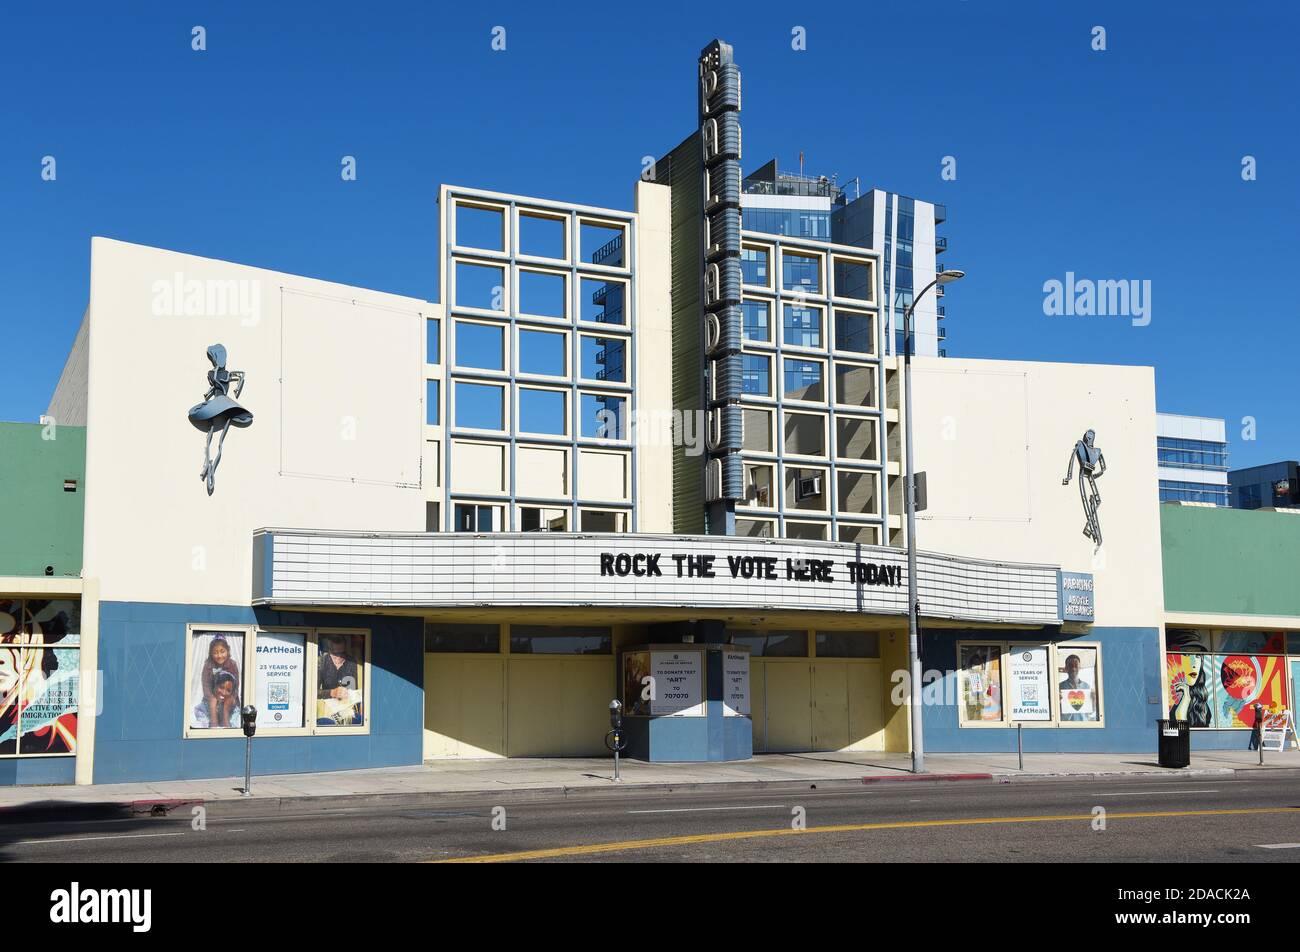 HOLLYWOOD, CALIFORNIA - 10 NOV 2020:  The Hollywood Palladium, a theater built in the Streamline Moderne, Art Deco style. Stock Photo